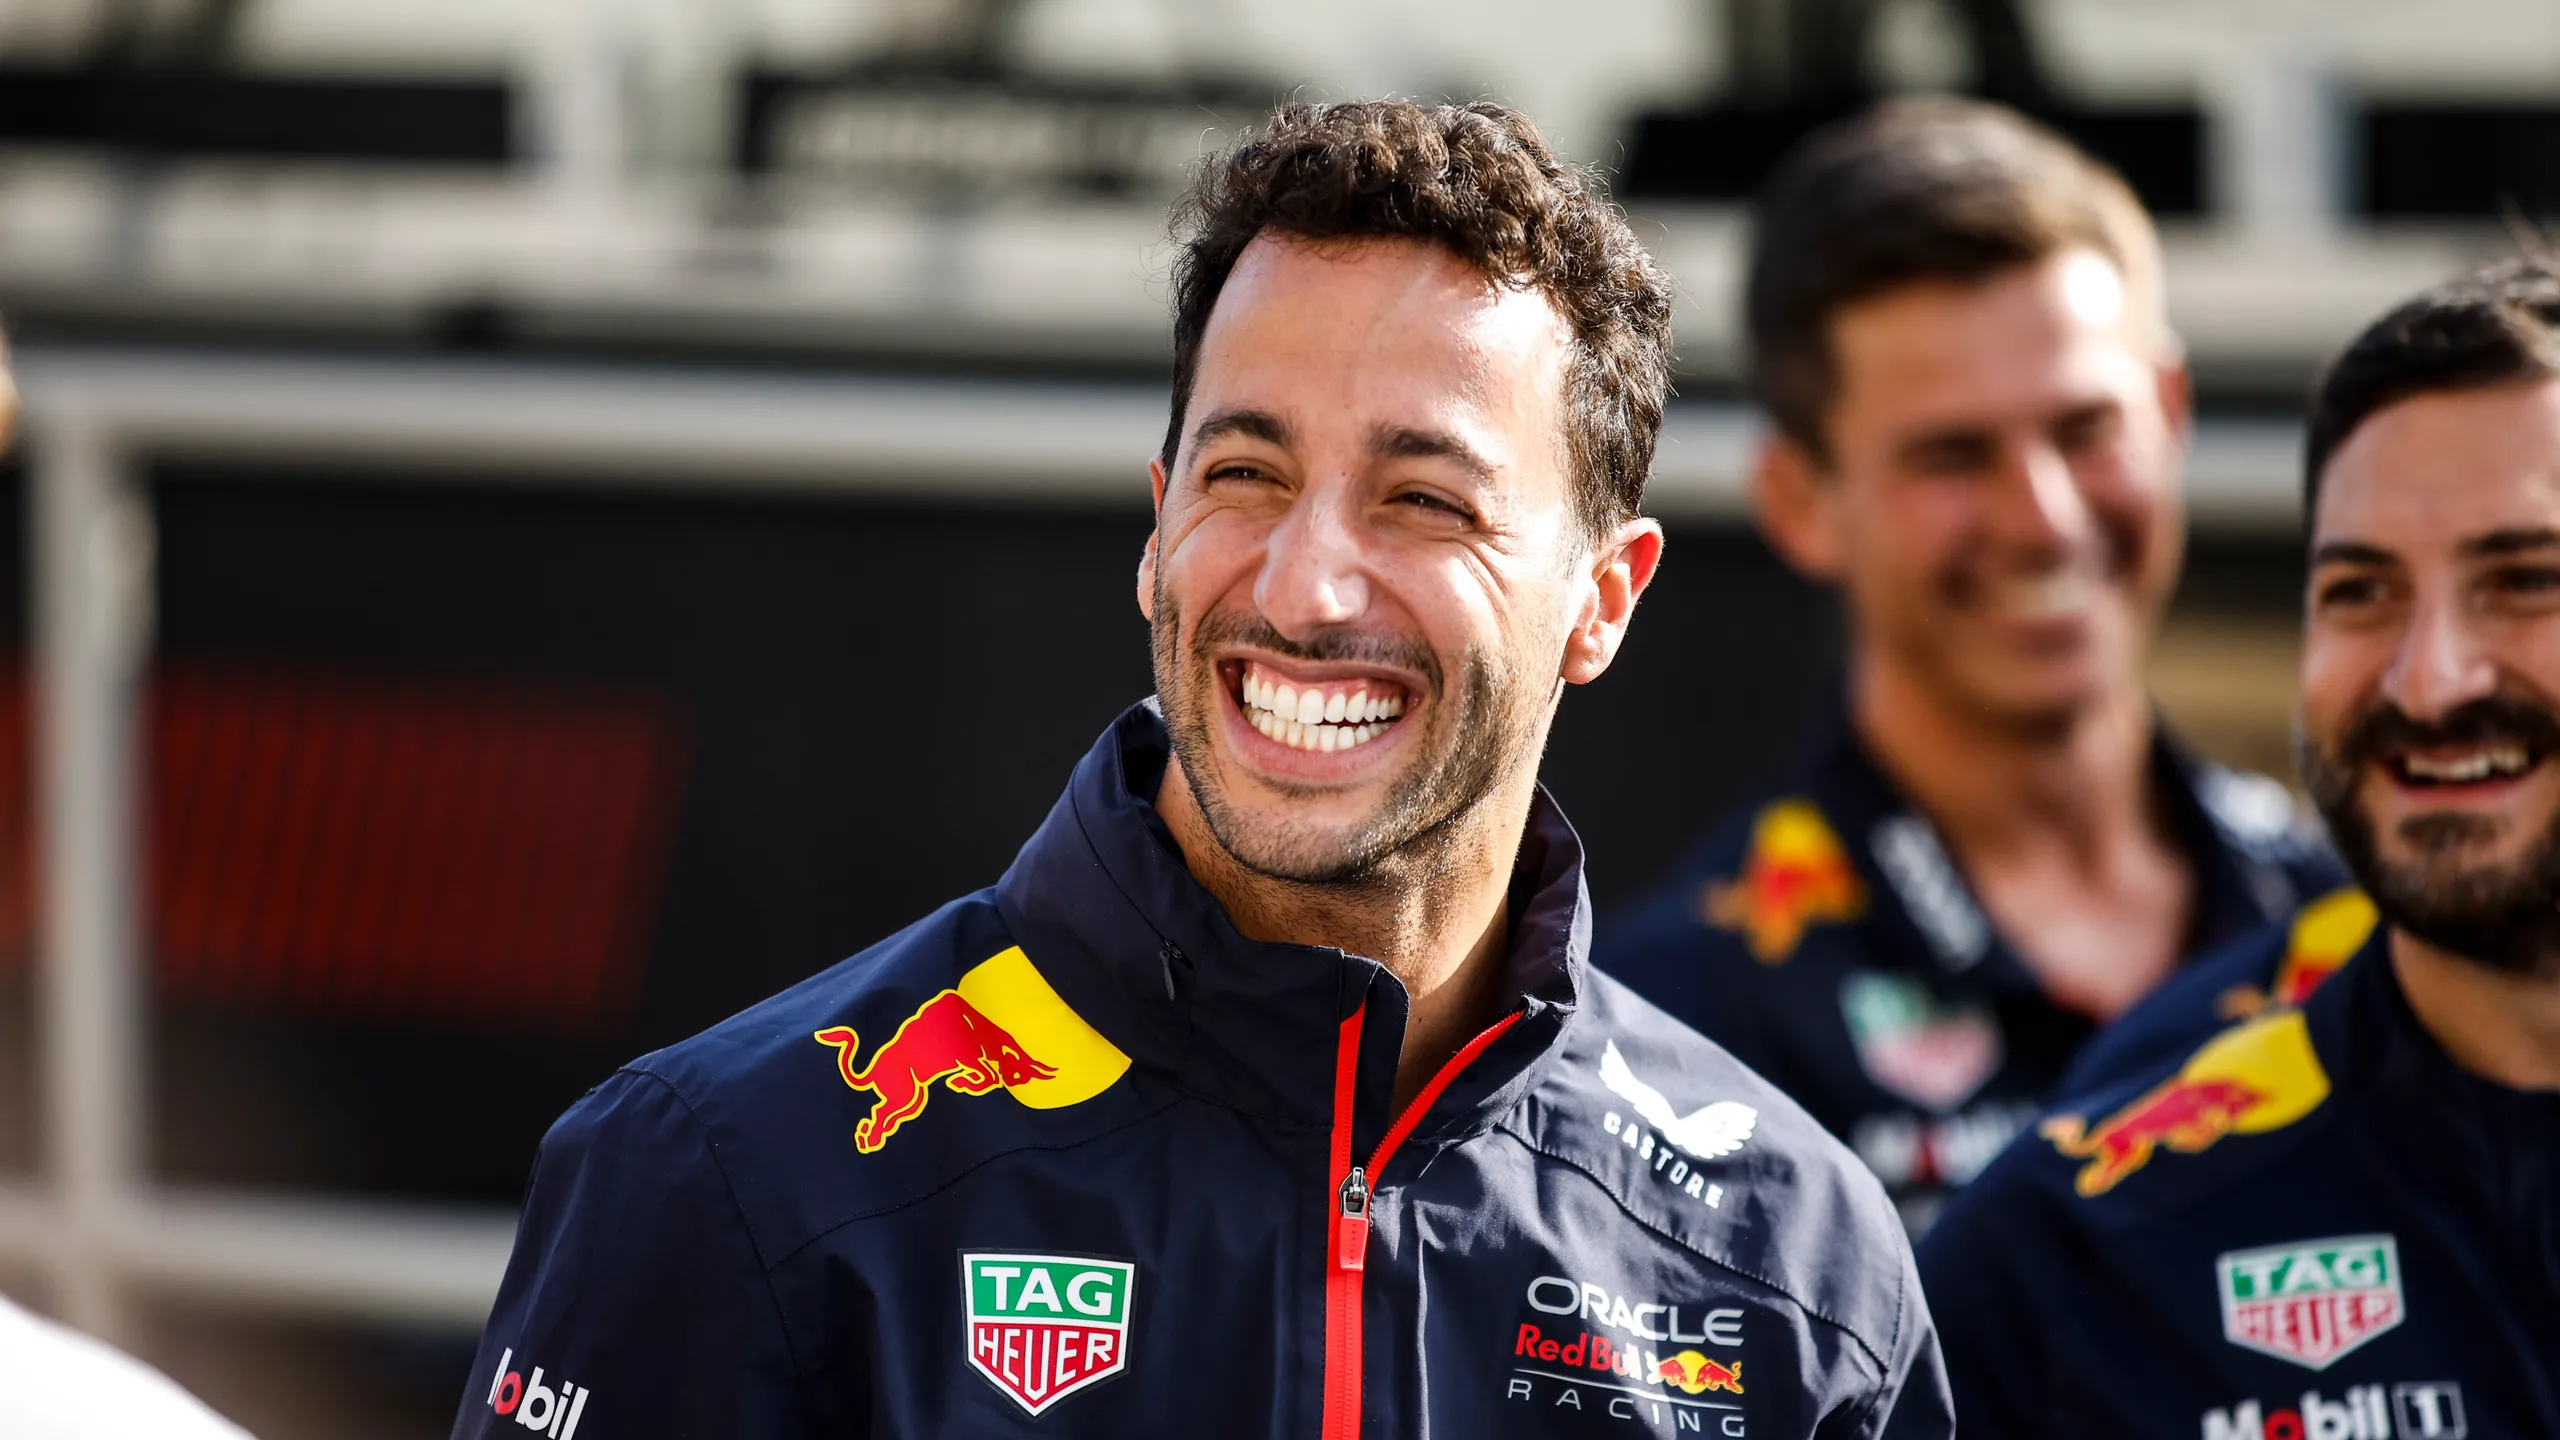 JUST IN: Daniel Ricciardo has just being voted as one of F1 most...